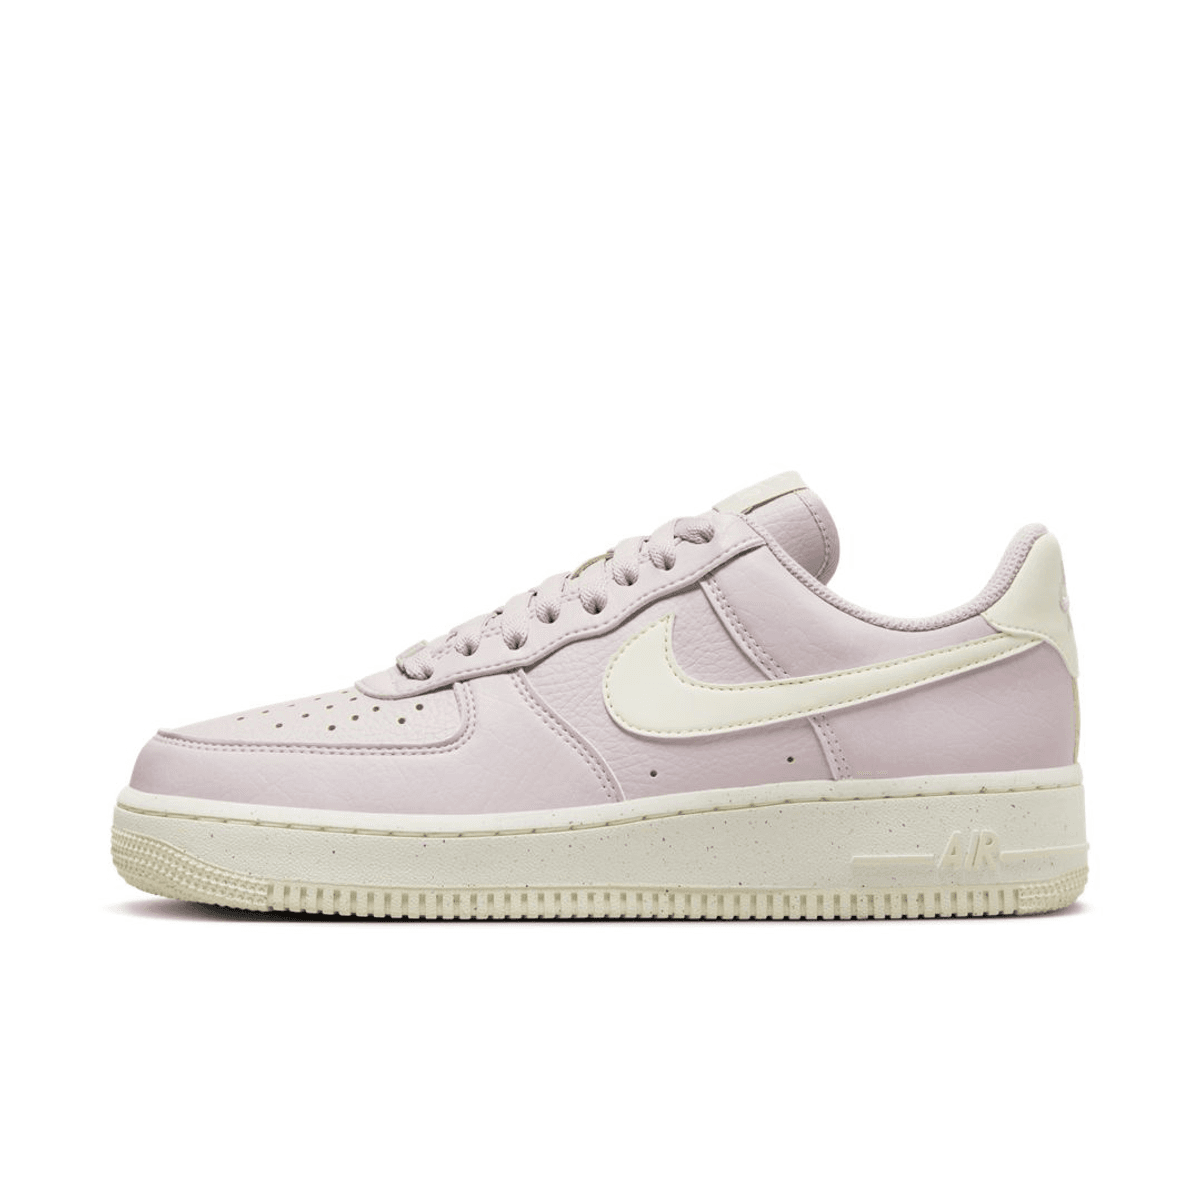 Official Images Of The Nike Air Force 1 Low "Next Nature"